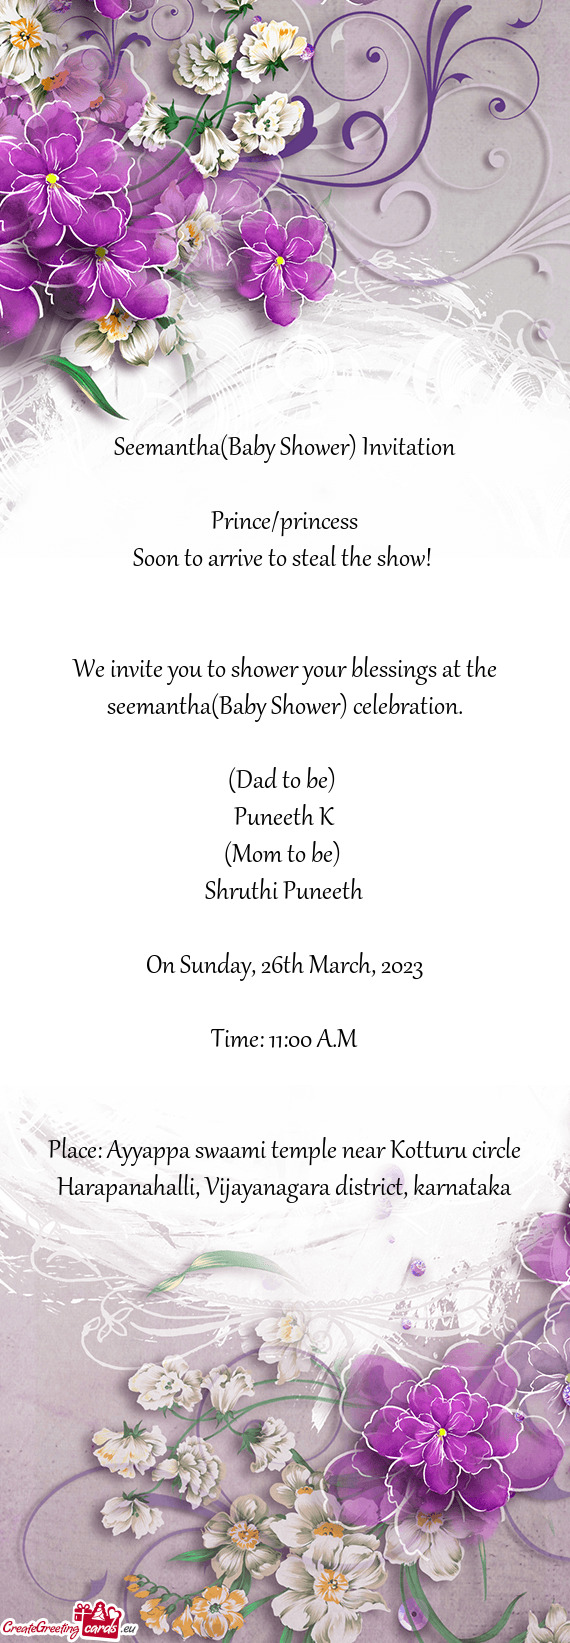 We invite you to shower your blessings at the seemantha(Baby Shower) celebration